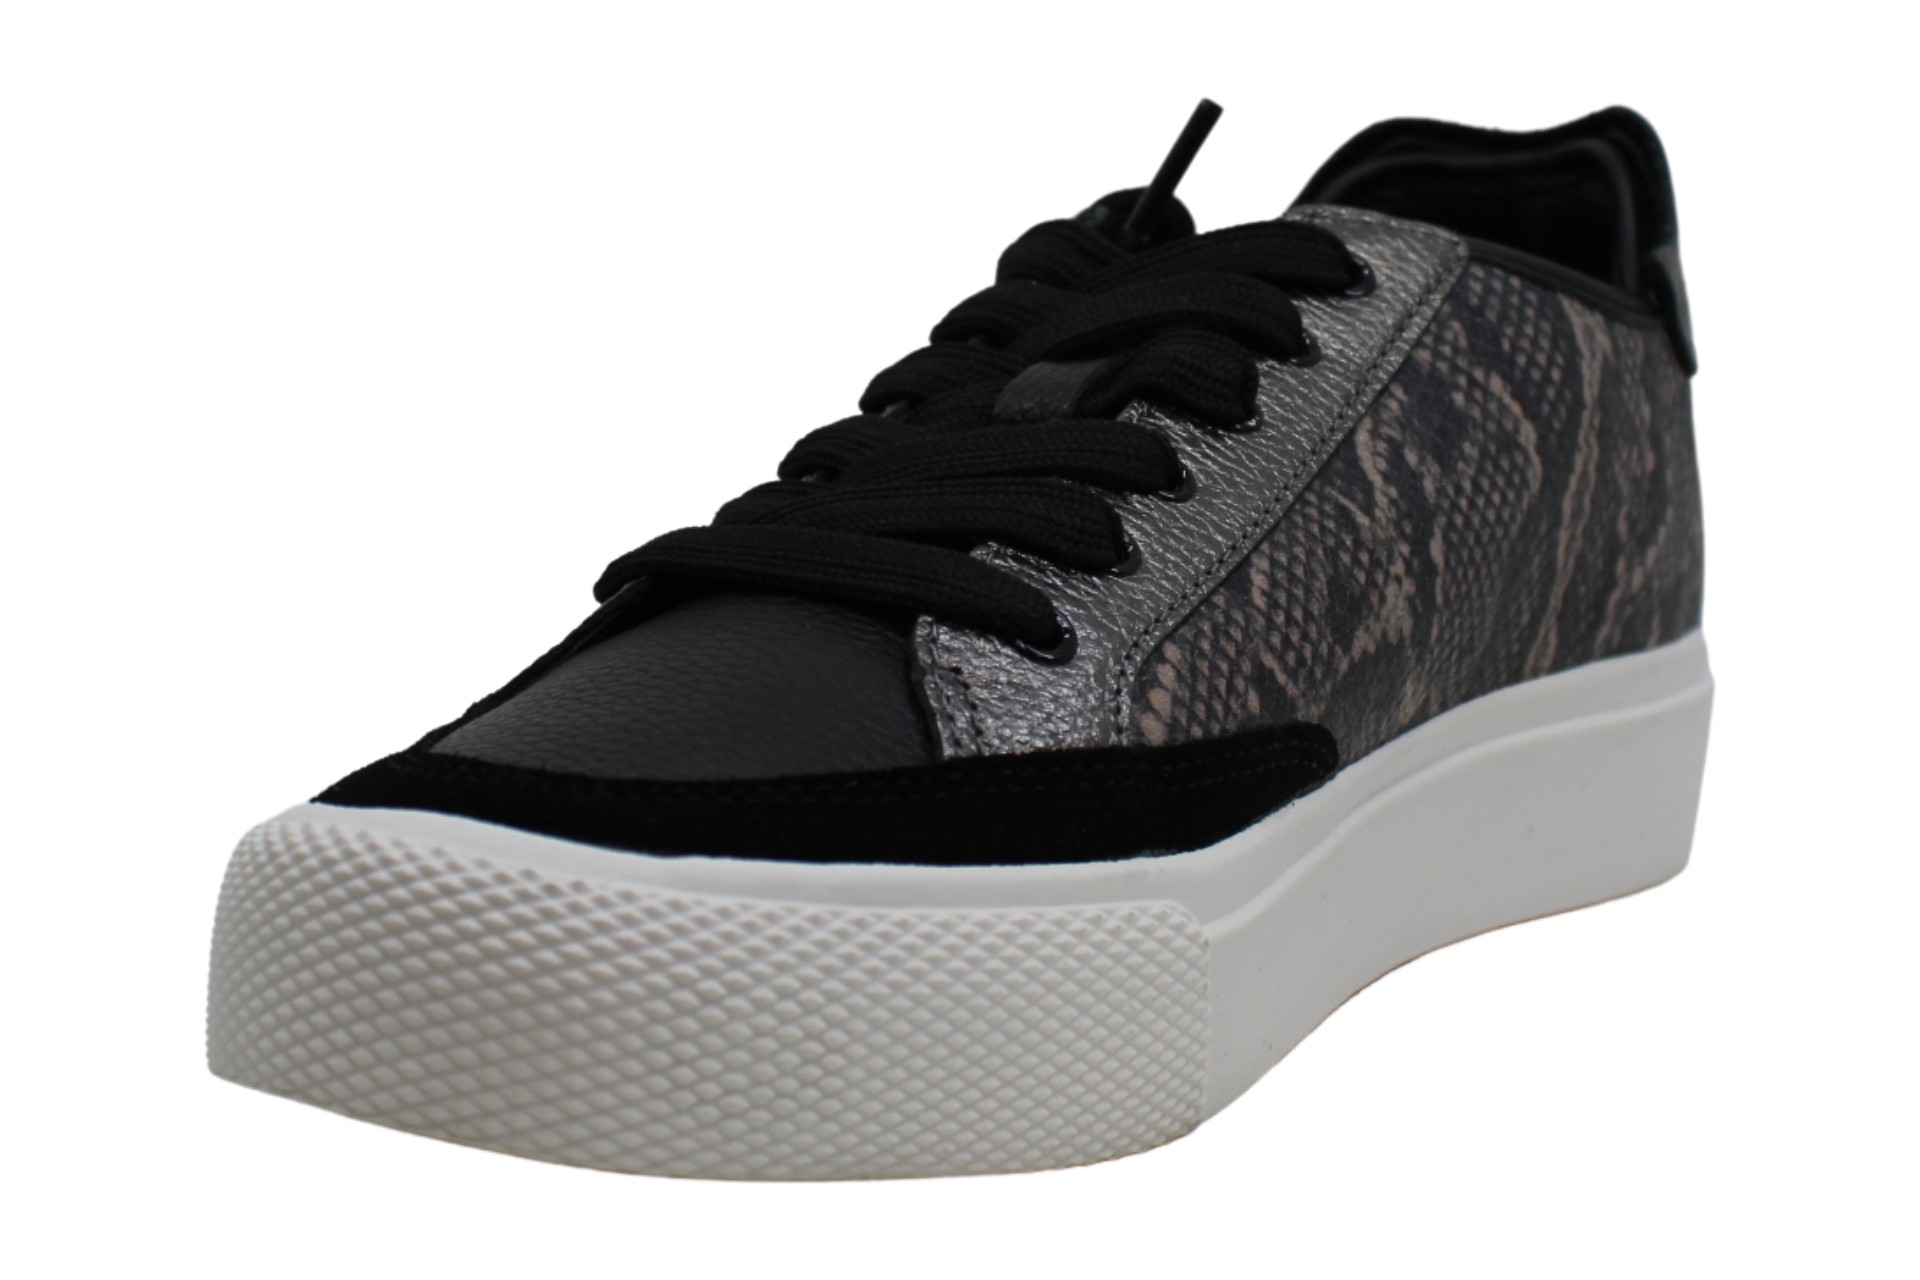 DKNY Womens reesa Low Top Lace Up Fashion Sneakers, Black, Size 8.0 ...